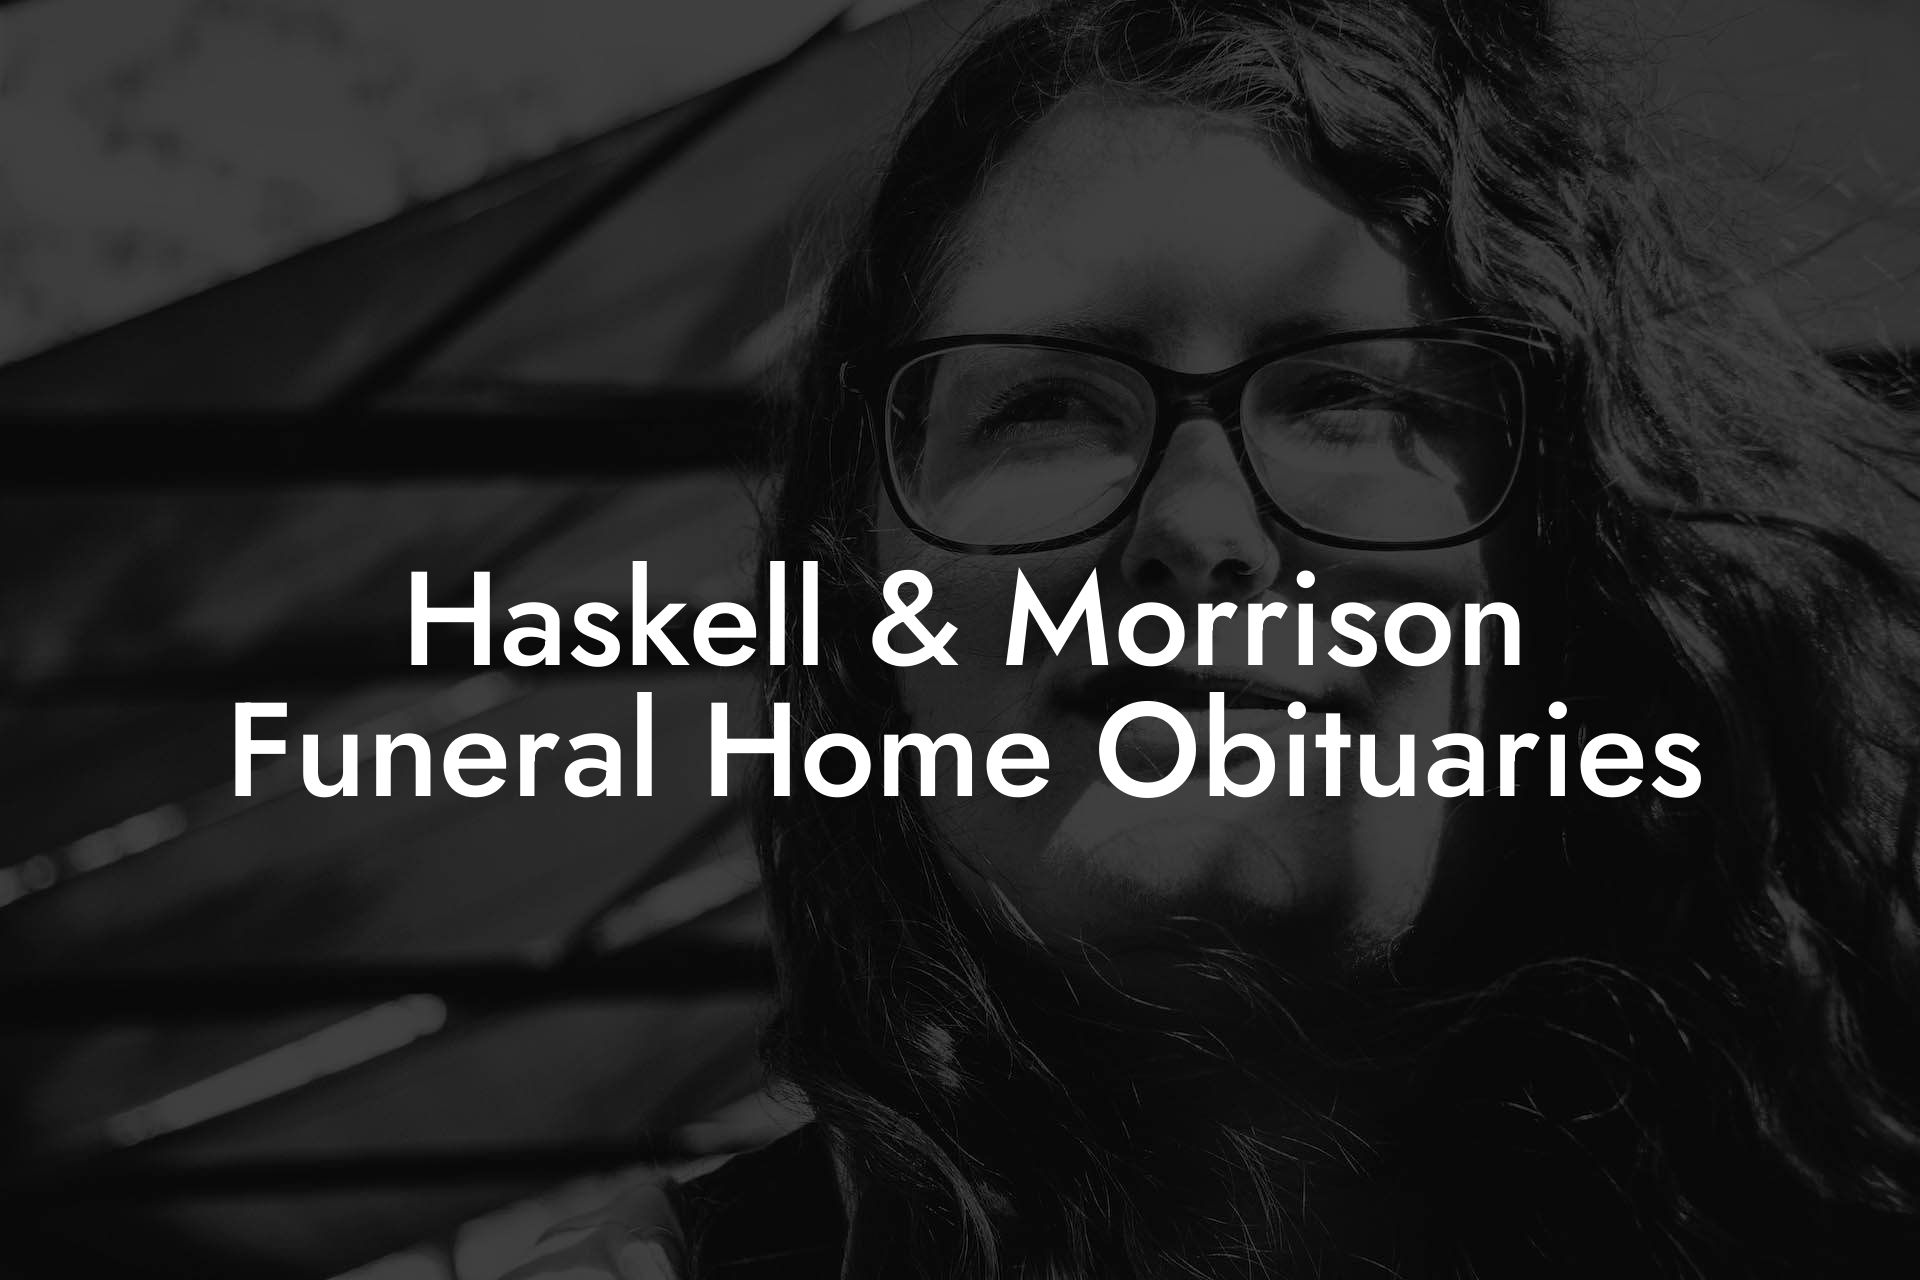 Haskell & Morrison Funeral Home Obituaries